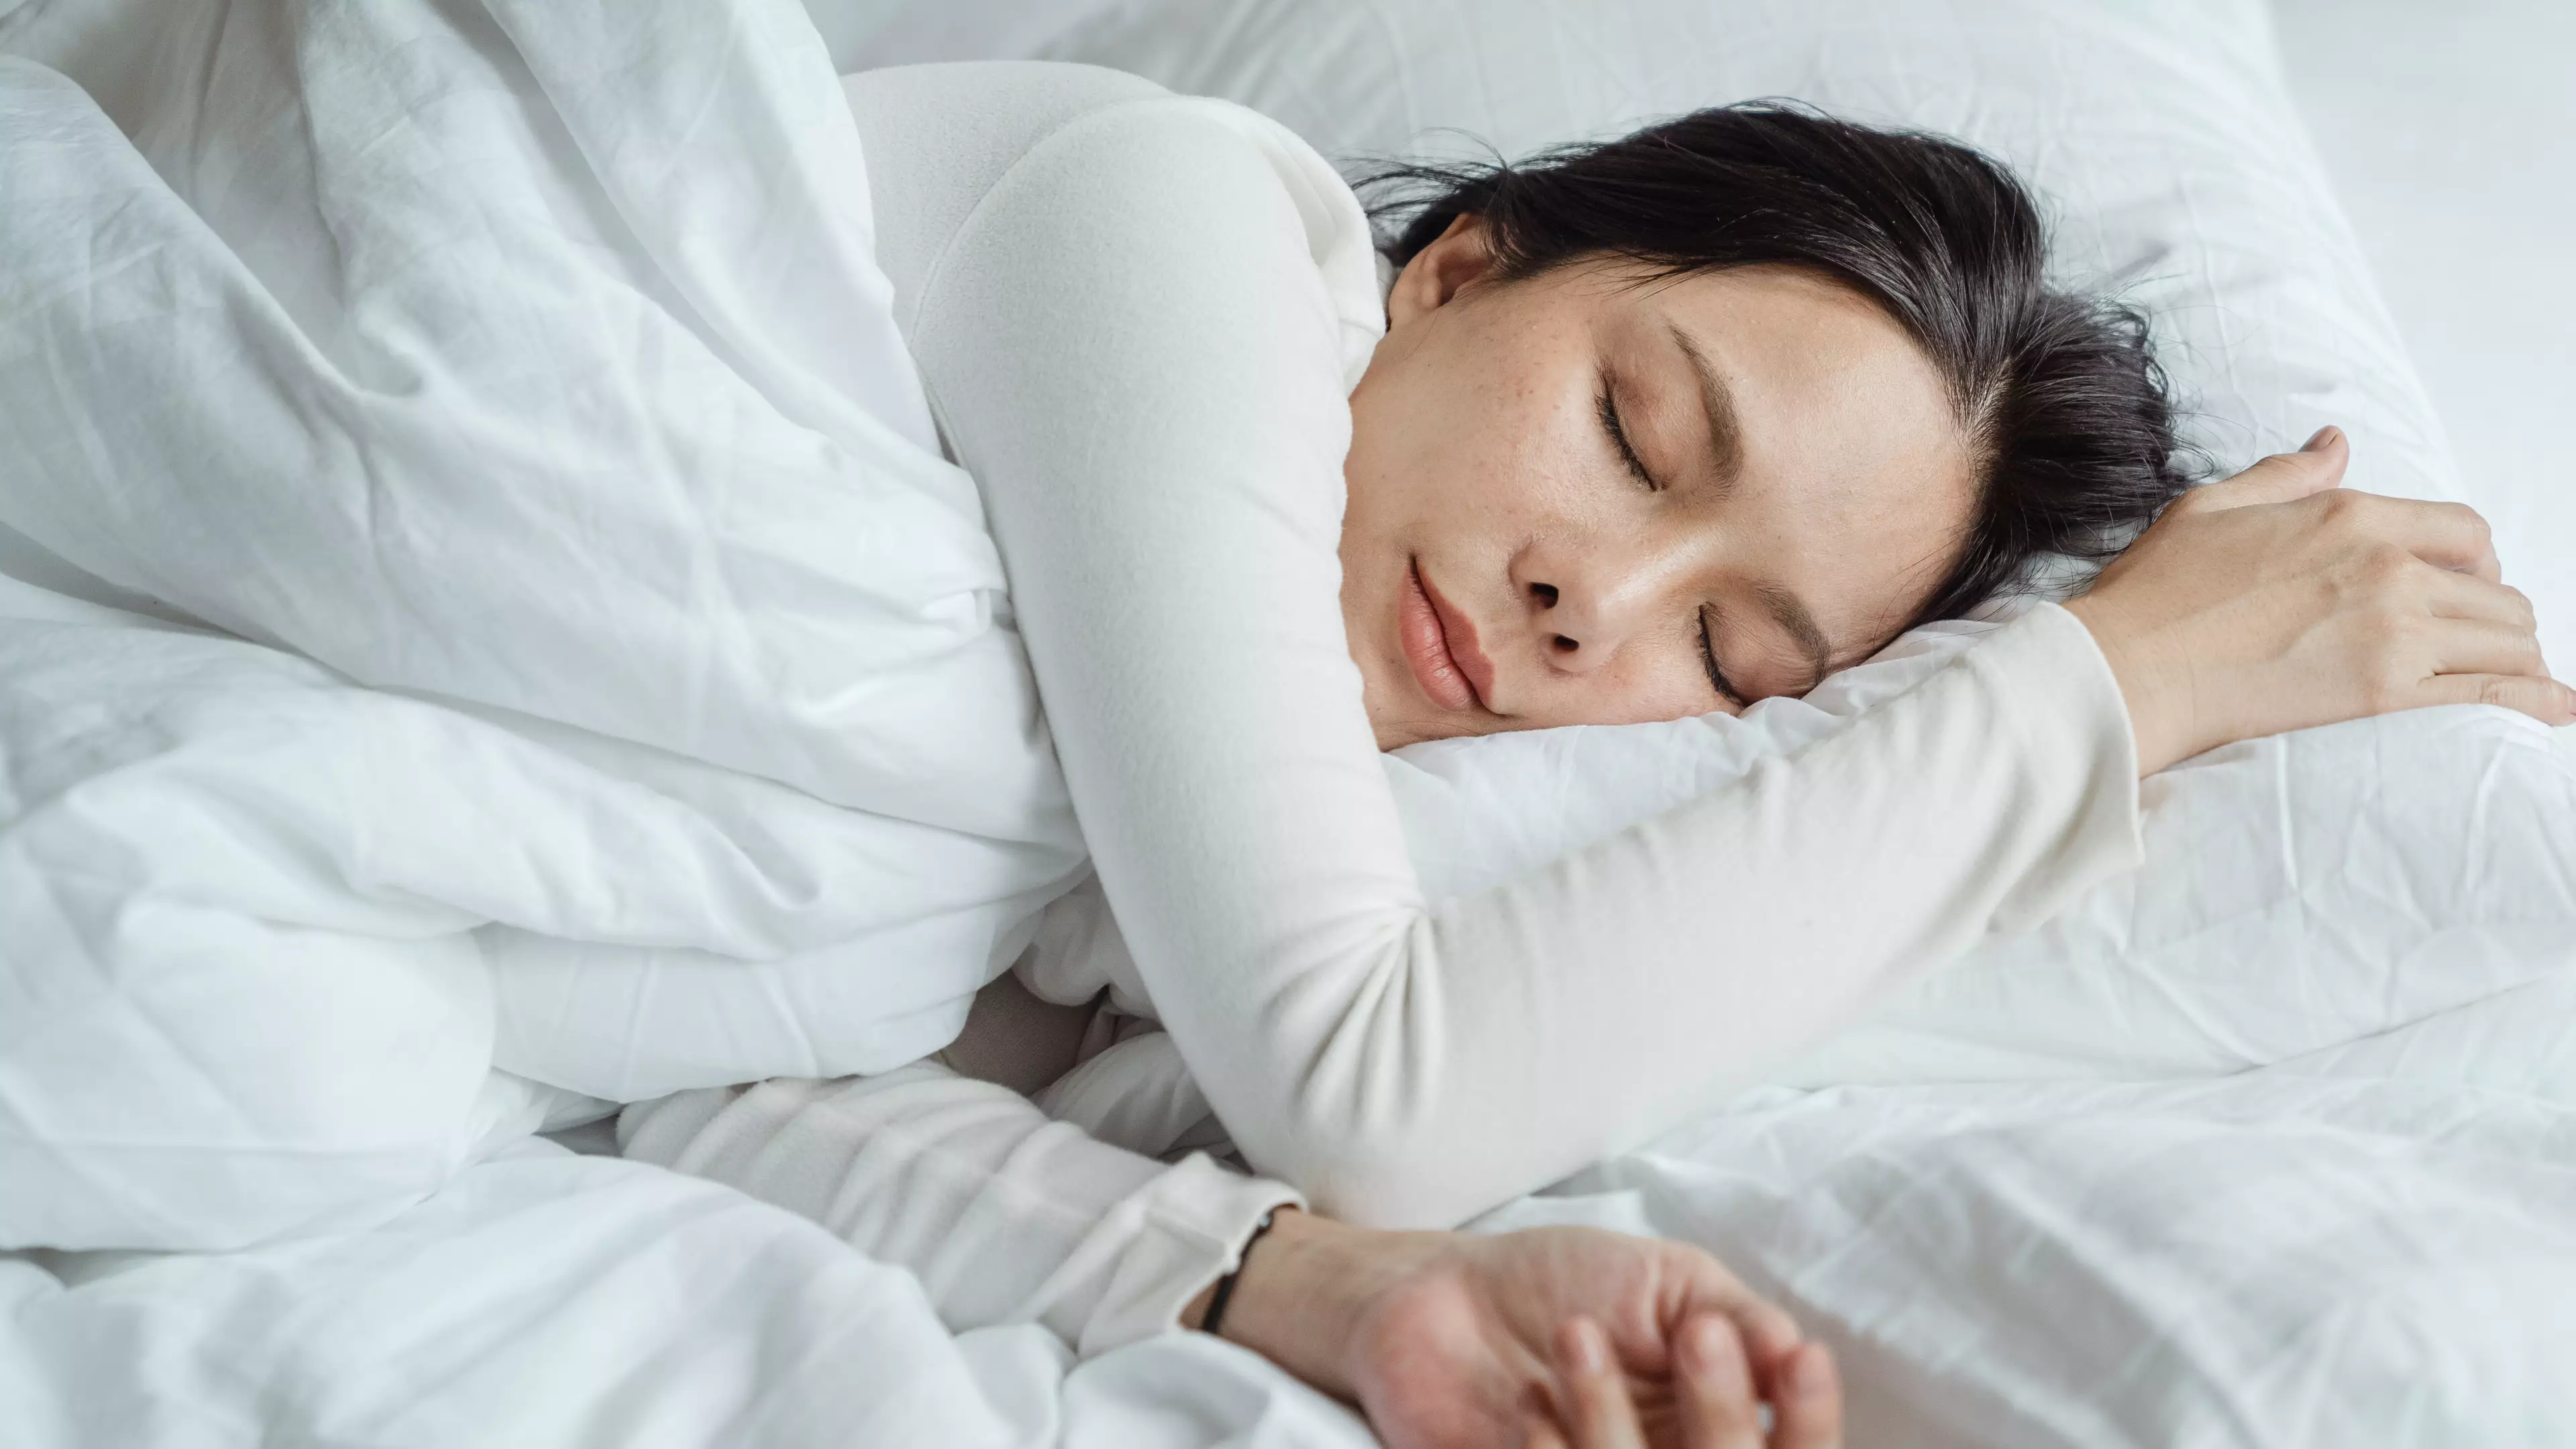 You Can Now Get Paid £300 To Sleep As Part Of Silentnight's 'Pyjama Army' 